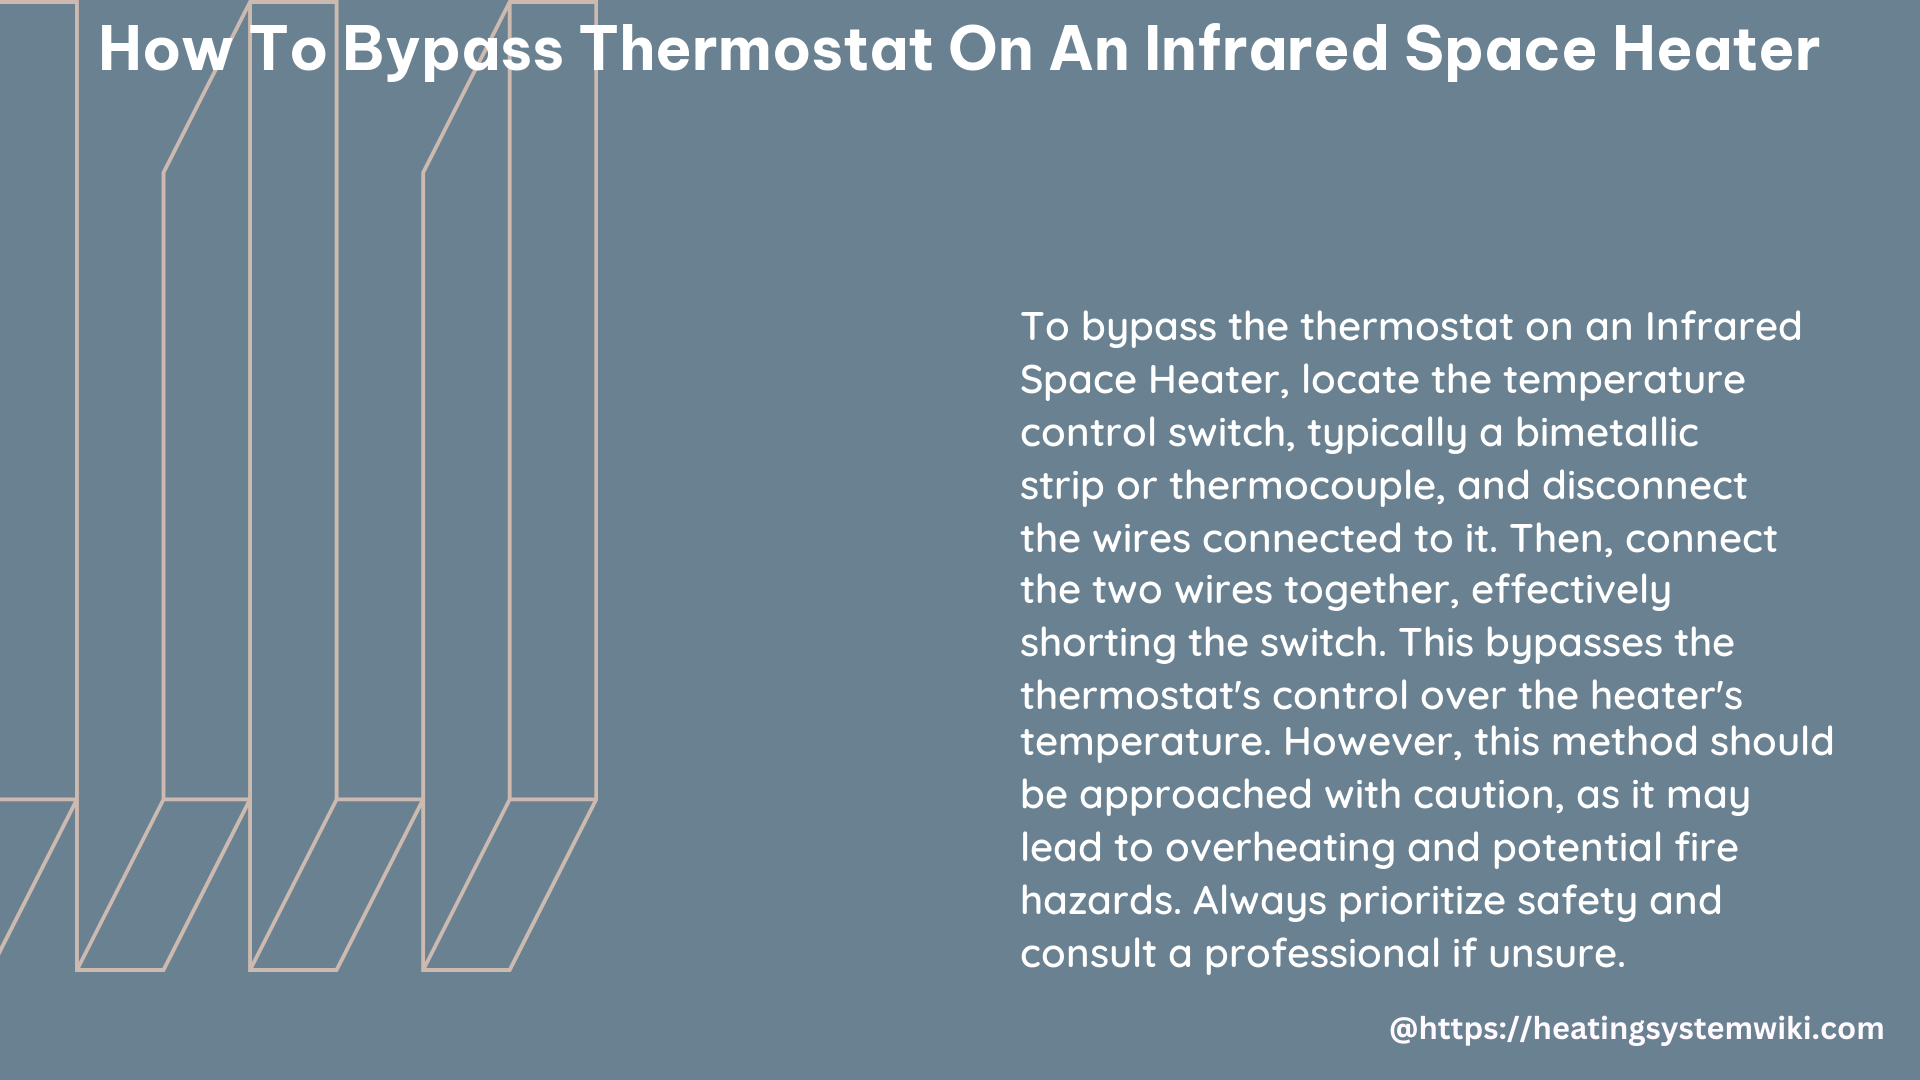 how to bypass thermostat on an Infrared Space heater